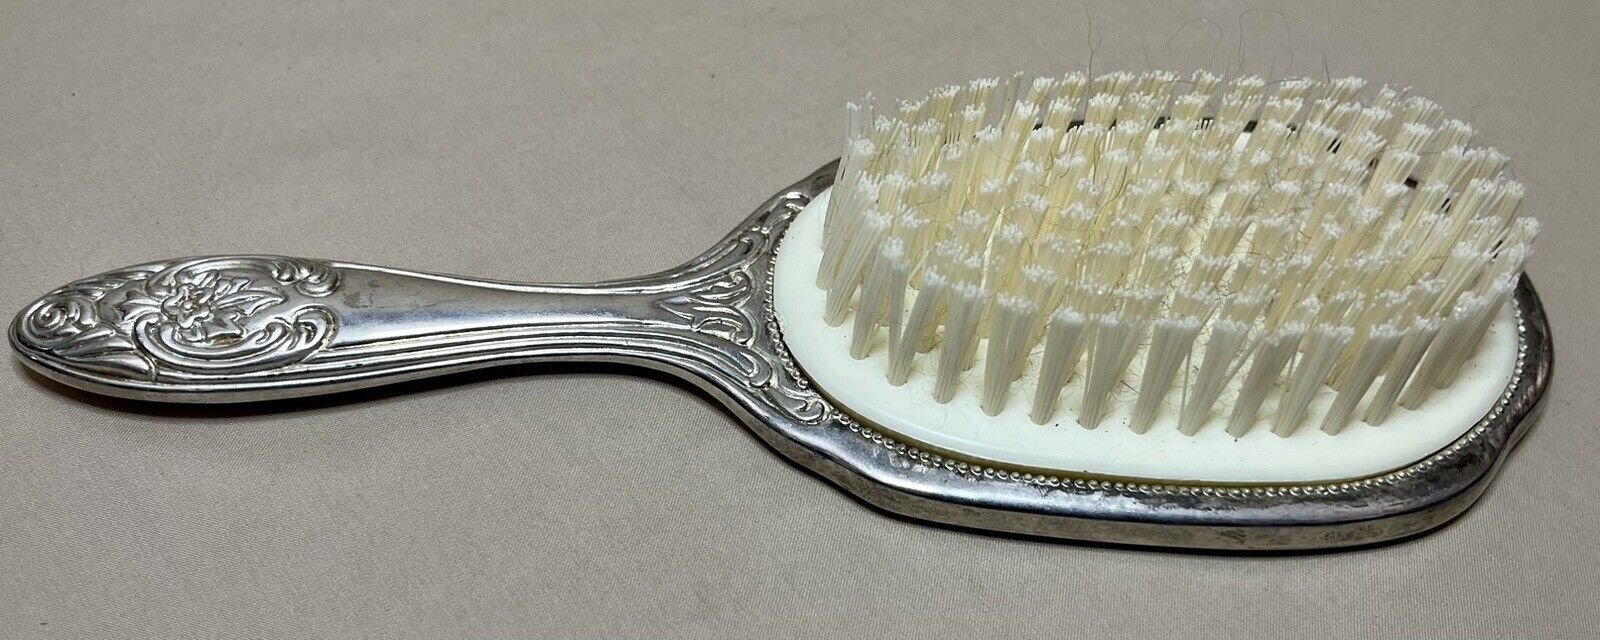 Vintage Victorian Silver Plated Hairbrush, 8 Inch Vanity Comb